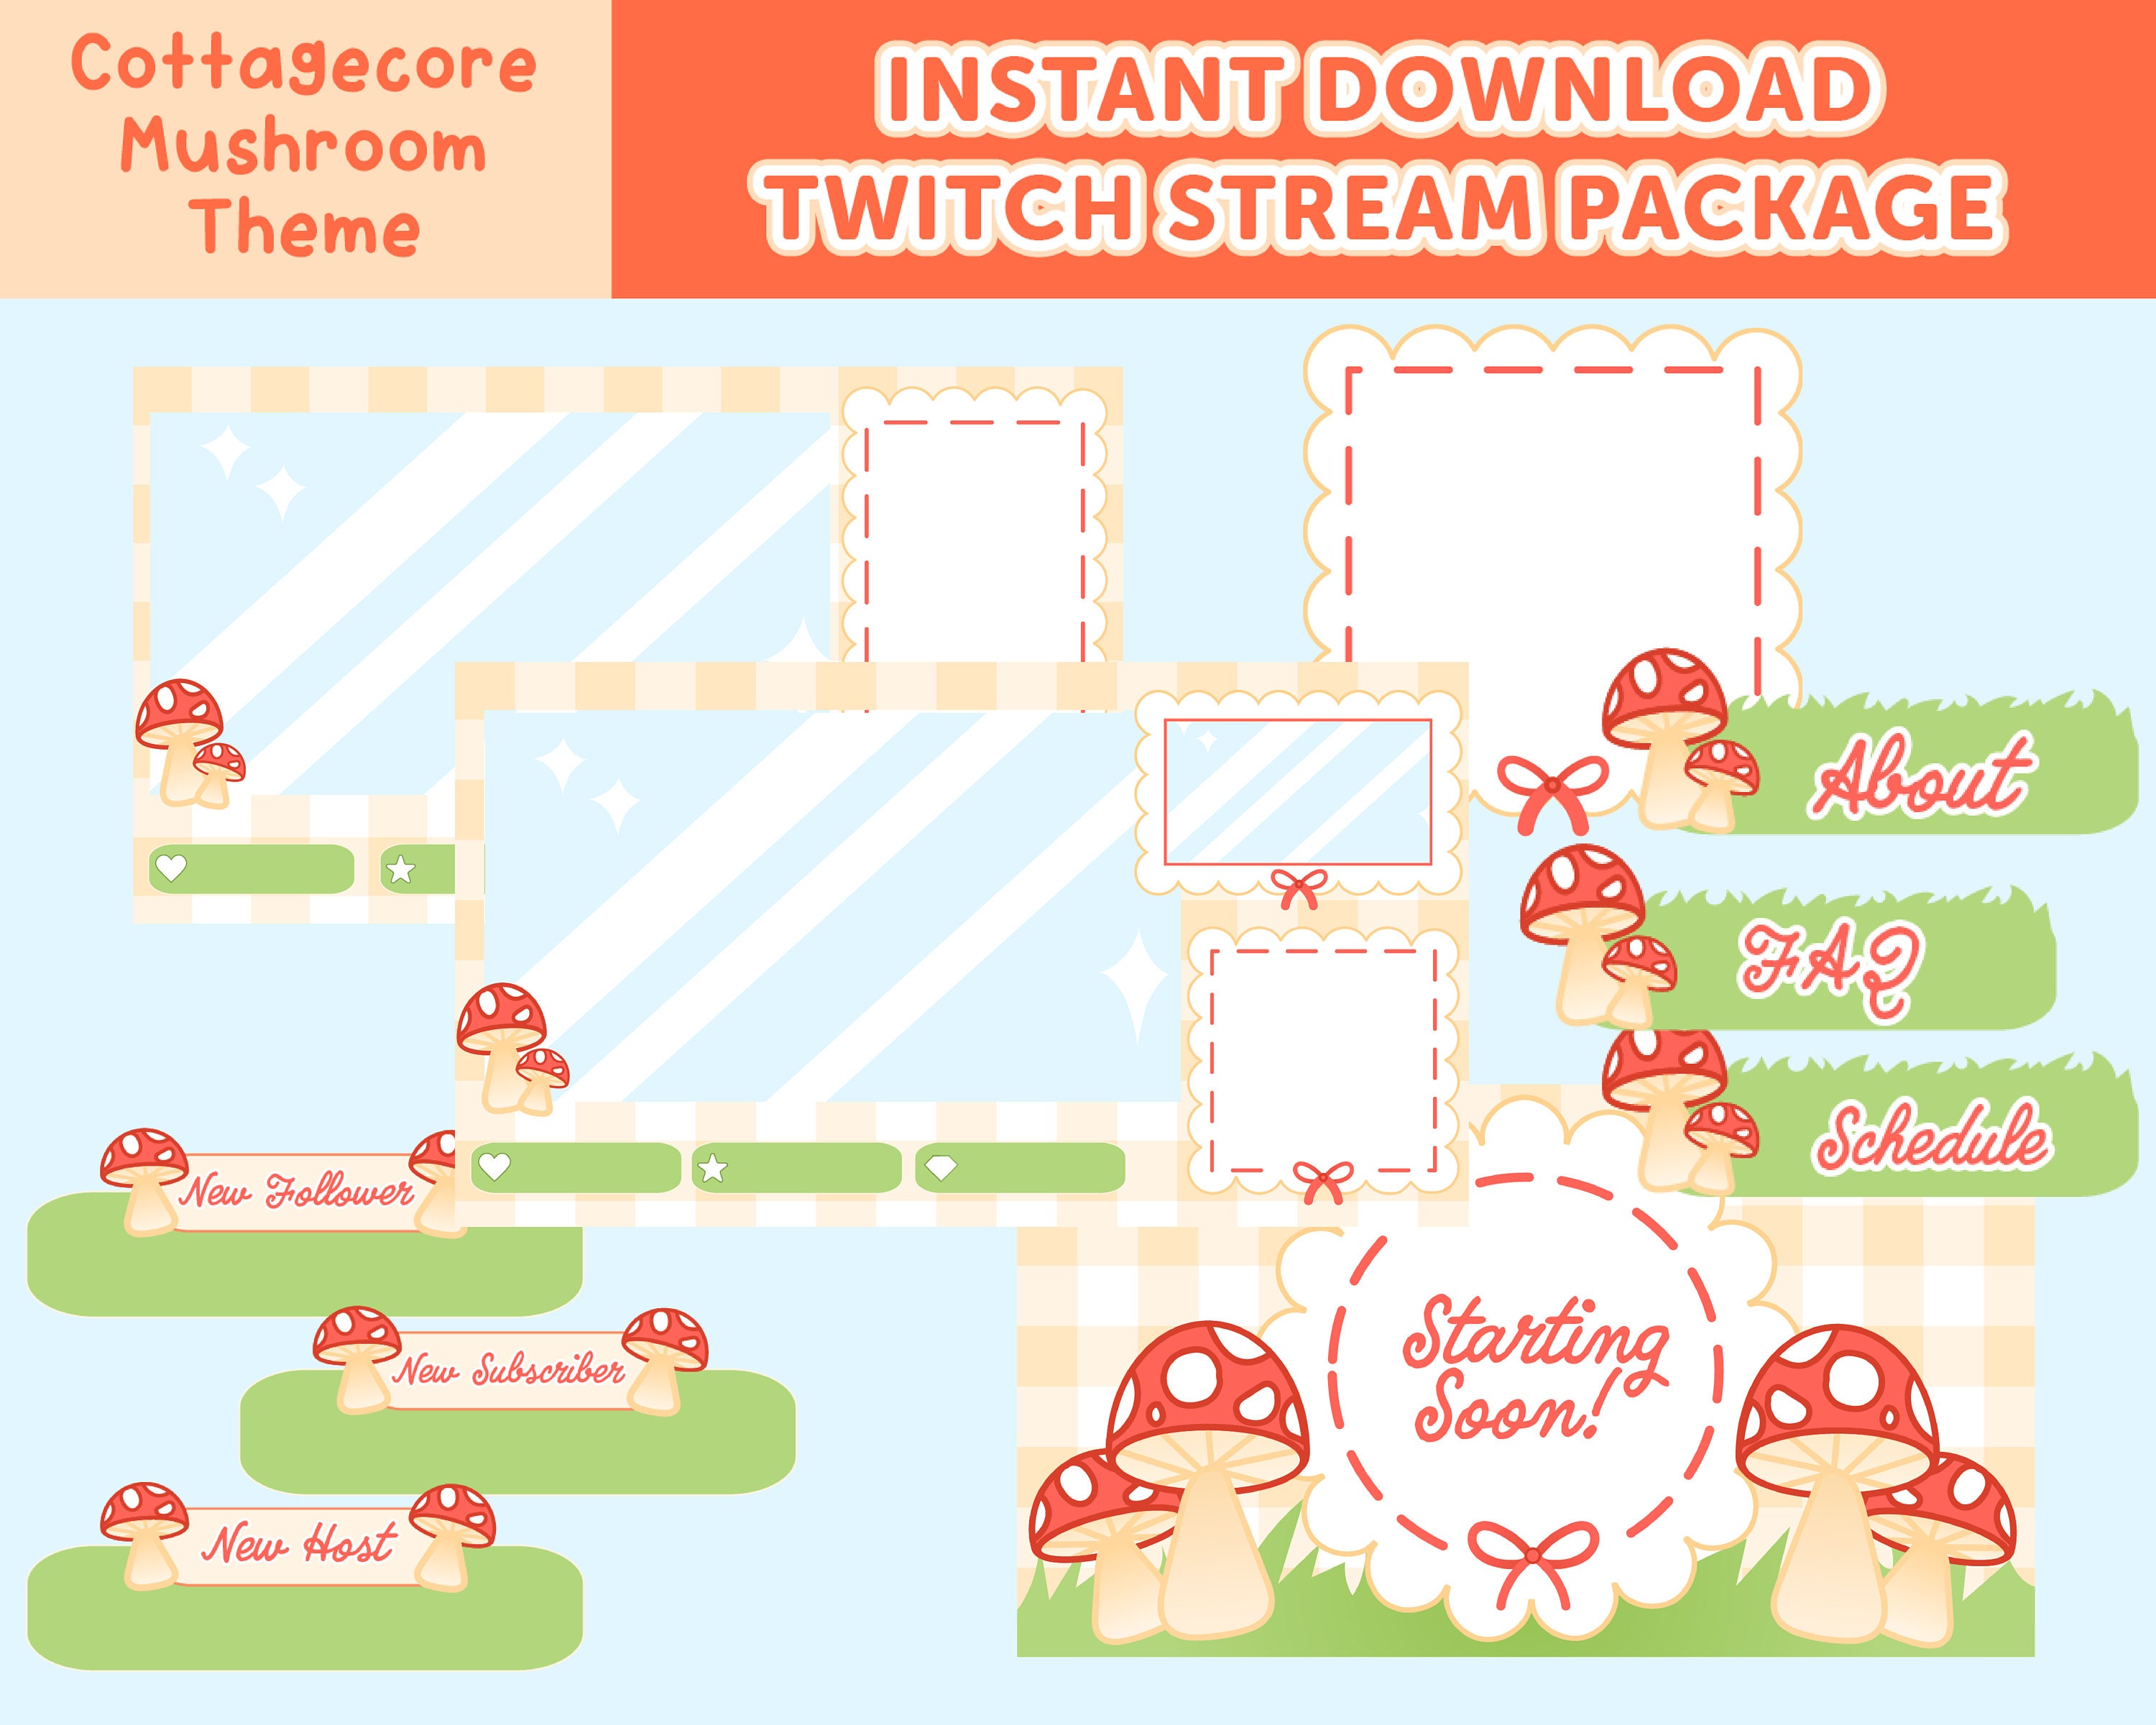 Cottagecore Mushroom Theme Panels Fairycore Chat Box Twitch Overlay Package Screens forest fairy Labels Webcam Alerts nature